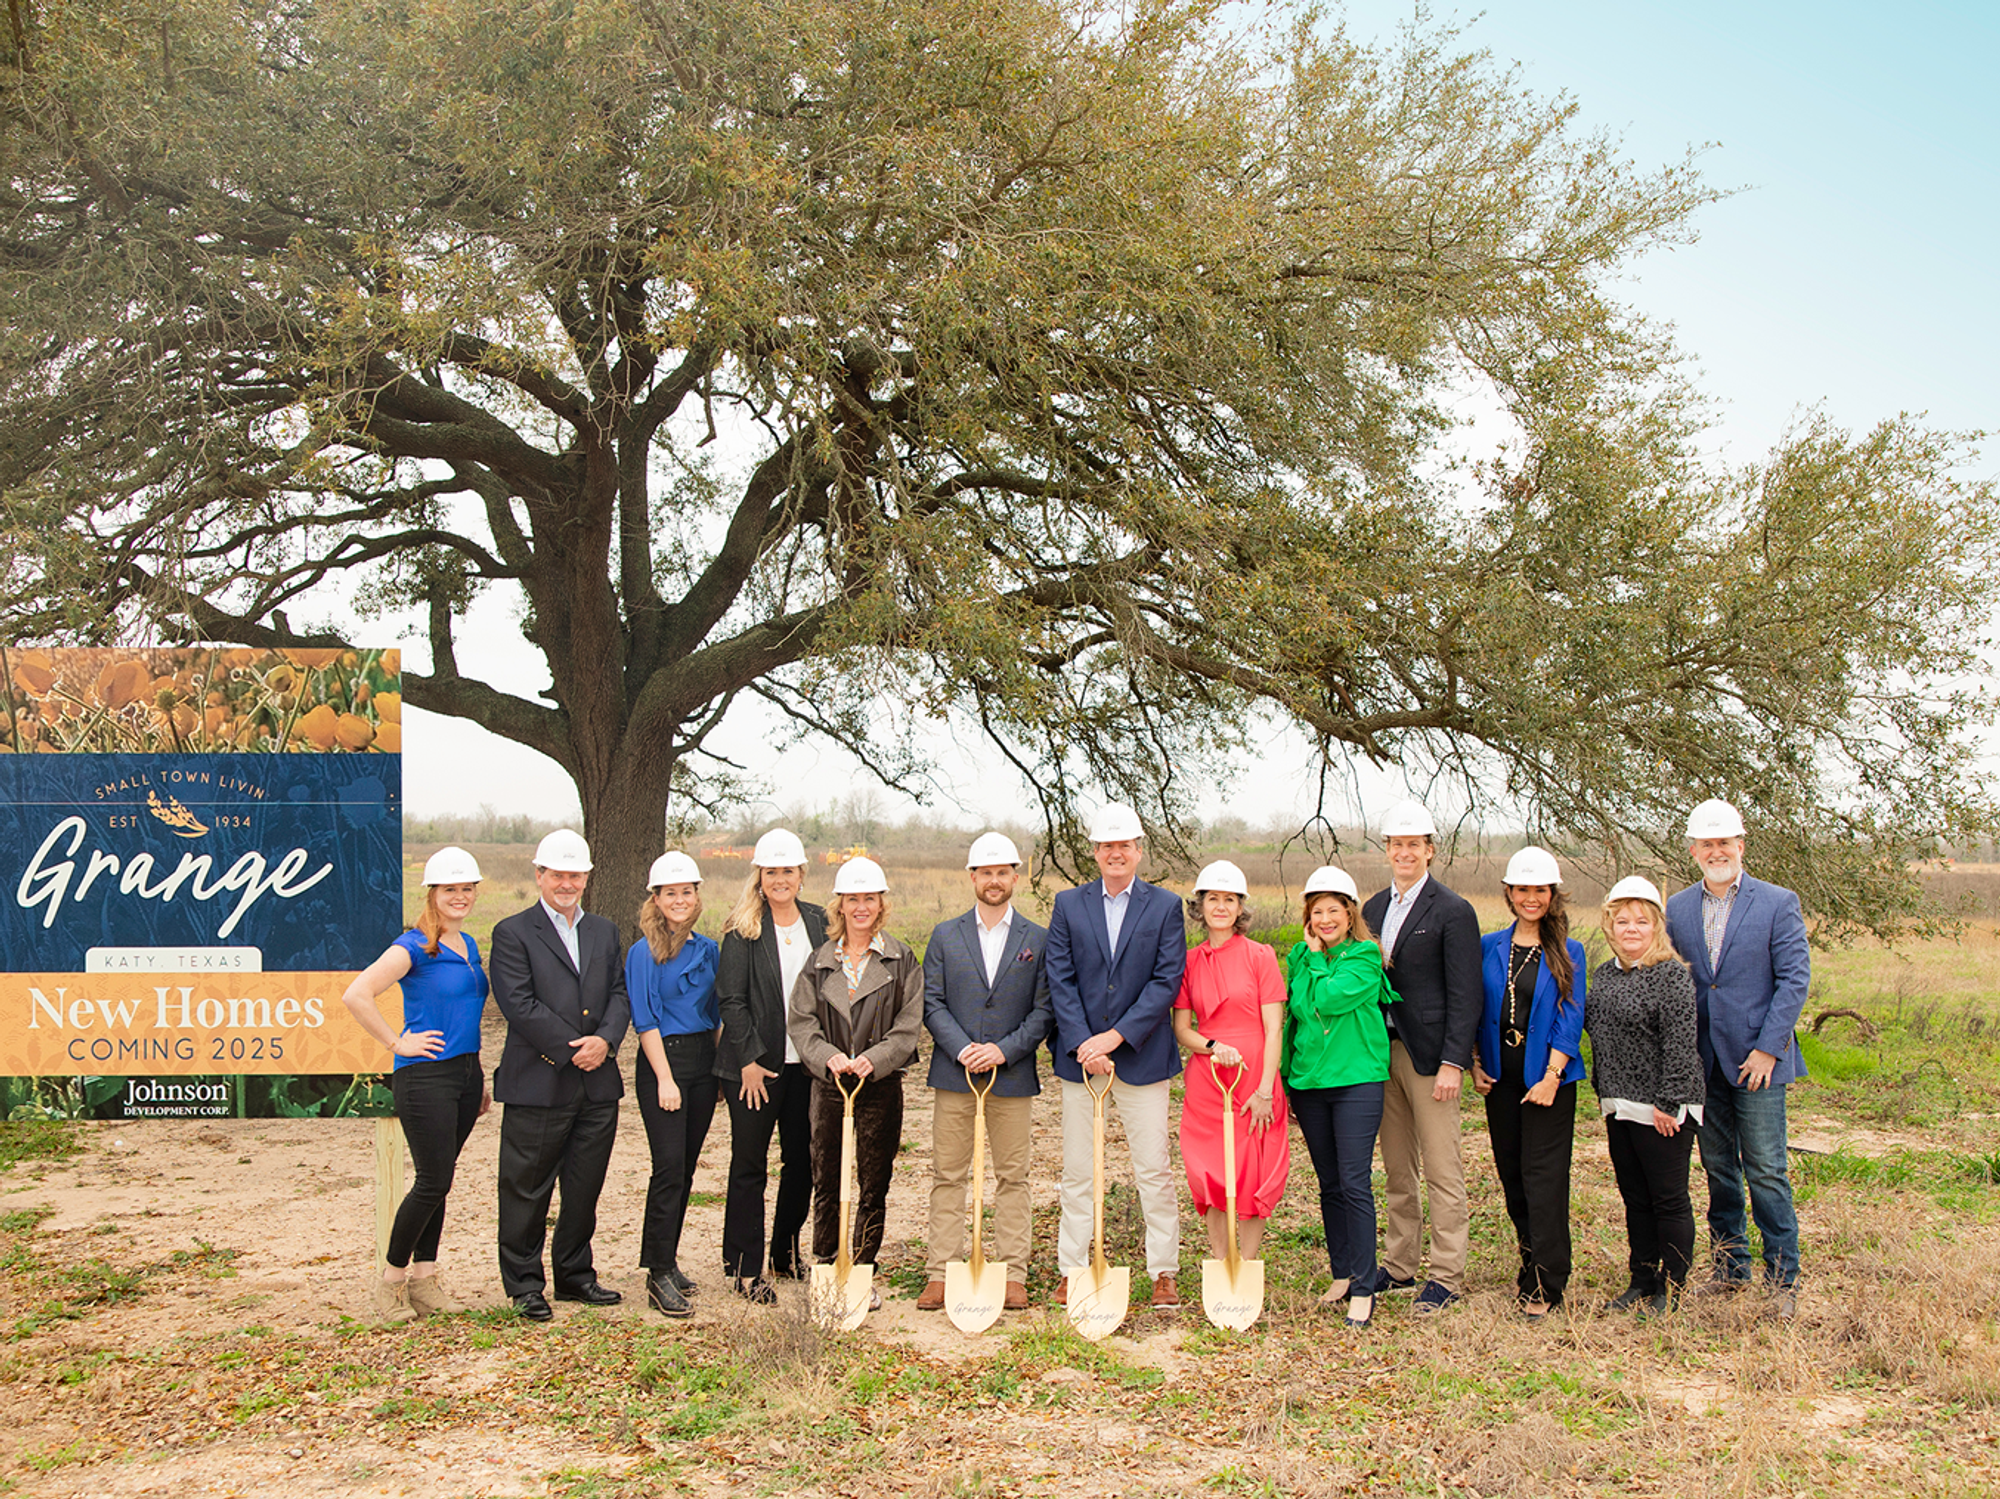 Johnson Development personnell with shovels at a groundbreaking ceremony announcing The Grange, a new community in Katy, Texas.